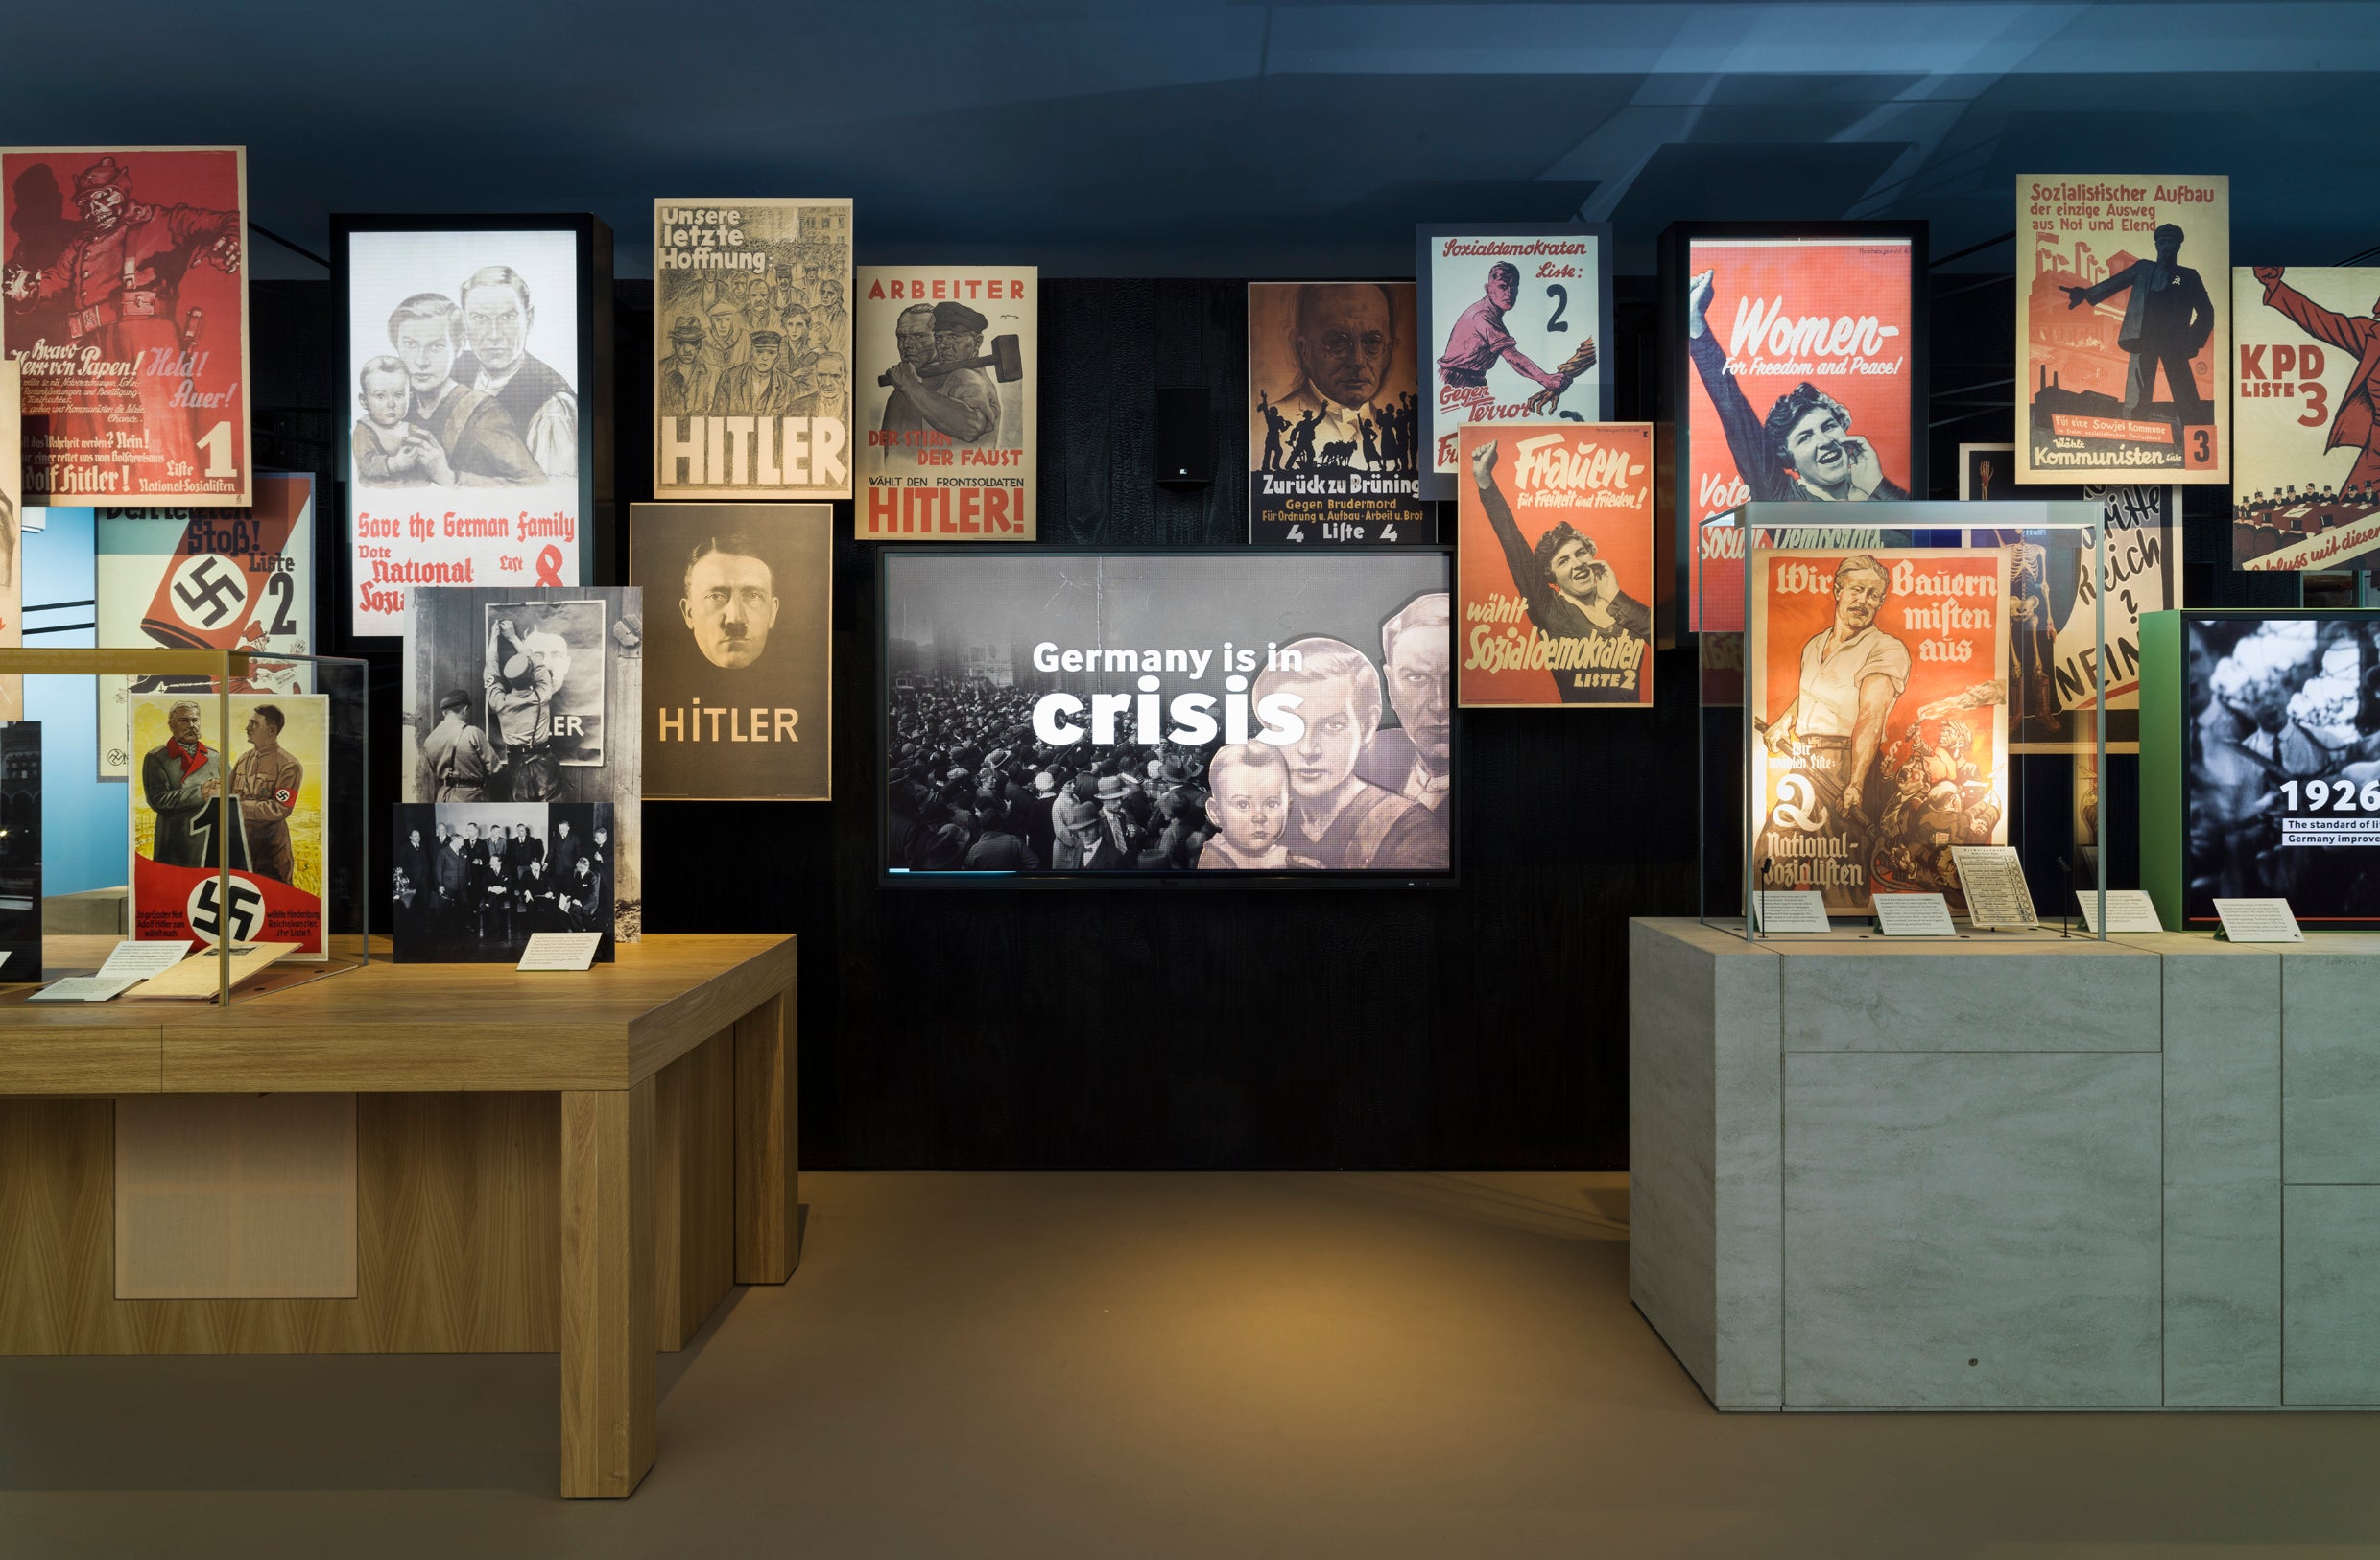 The Holocaust gallery at the Imperial War Museum will open on 20 October